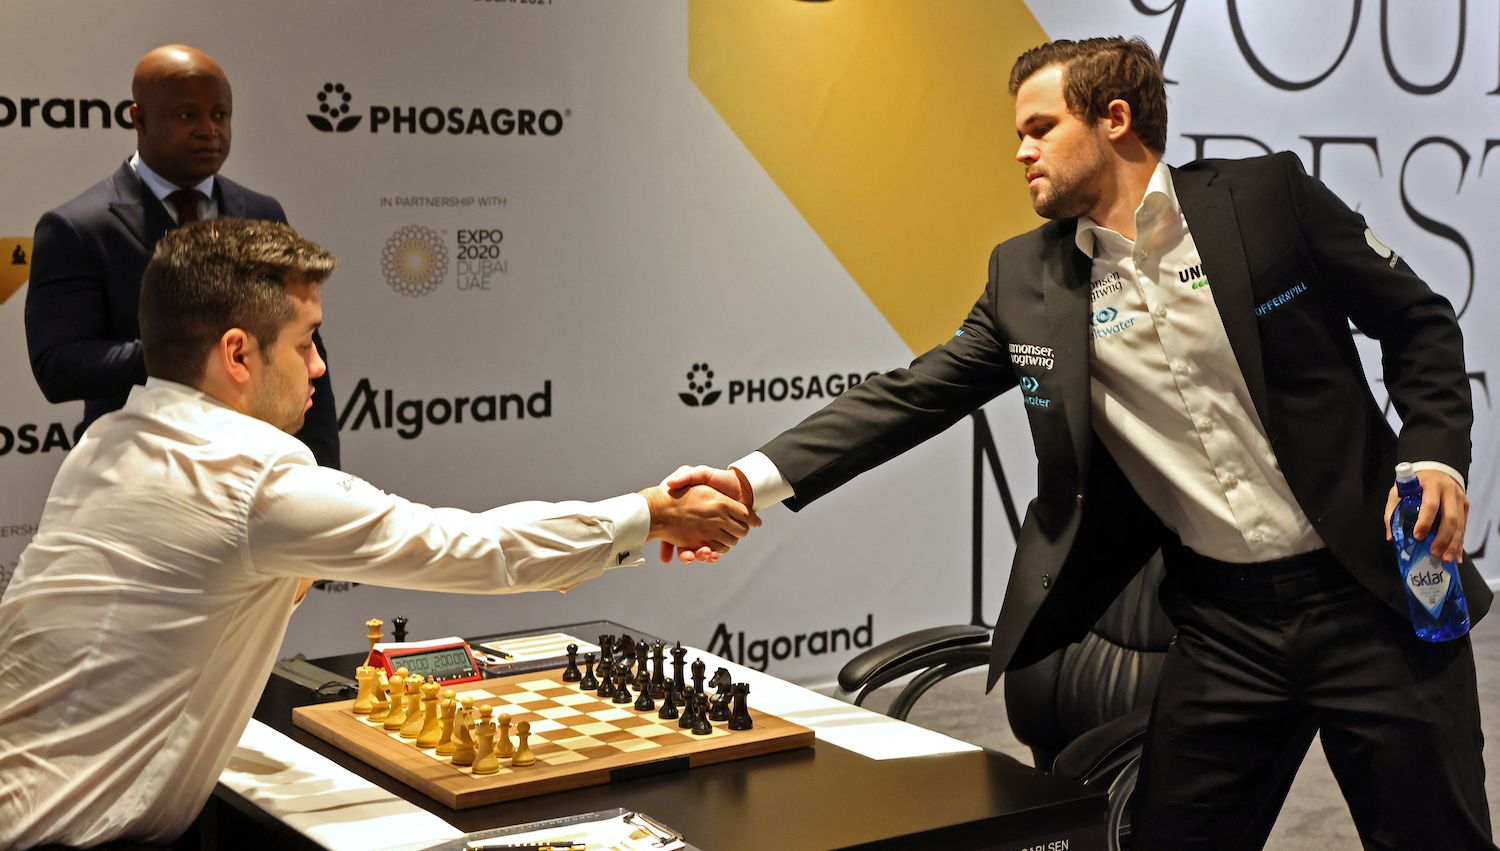 Russia's grandmaster Ian Nepomniachtchi and Norway's grandmaster Magnus Carlsen play game nice during the FIDE World Chess Championship Dubai 2021, at the Dubai Expo 2020 in the Gulf emirate, on December 7, 2021. (Photo by Giuseppe CACACE / AFP) (Photo by GIUSEPPE CACACE/AFP via Getty Images)